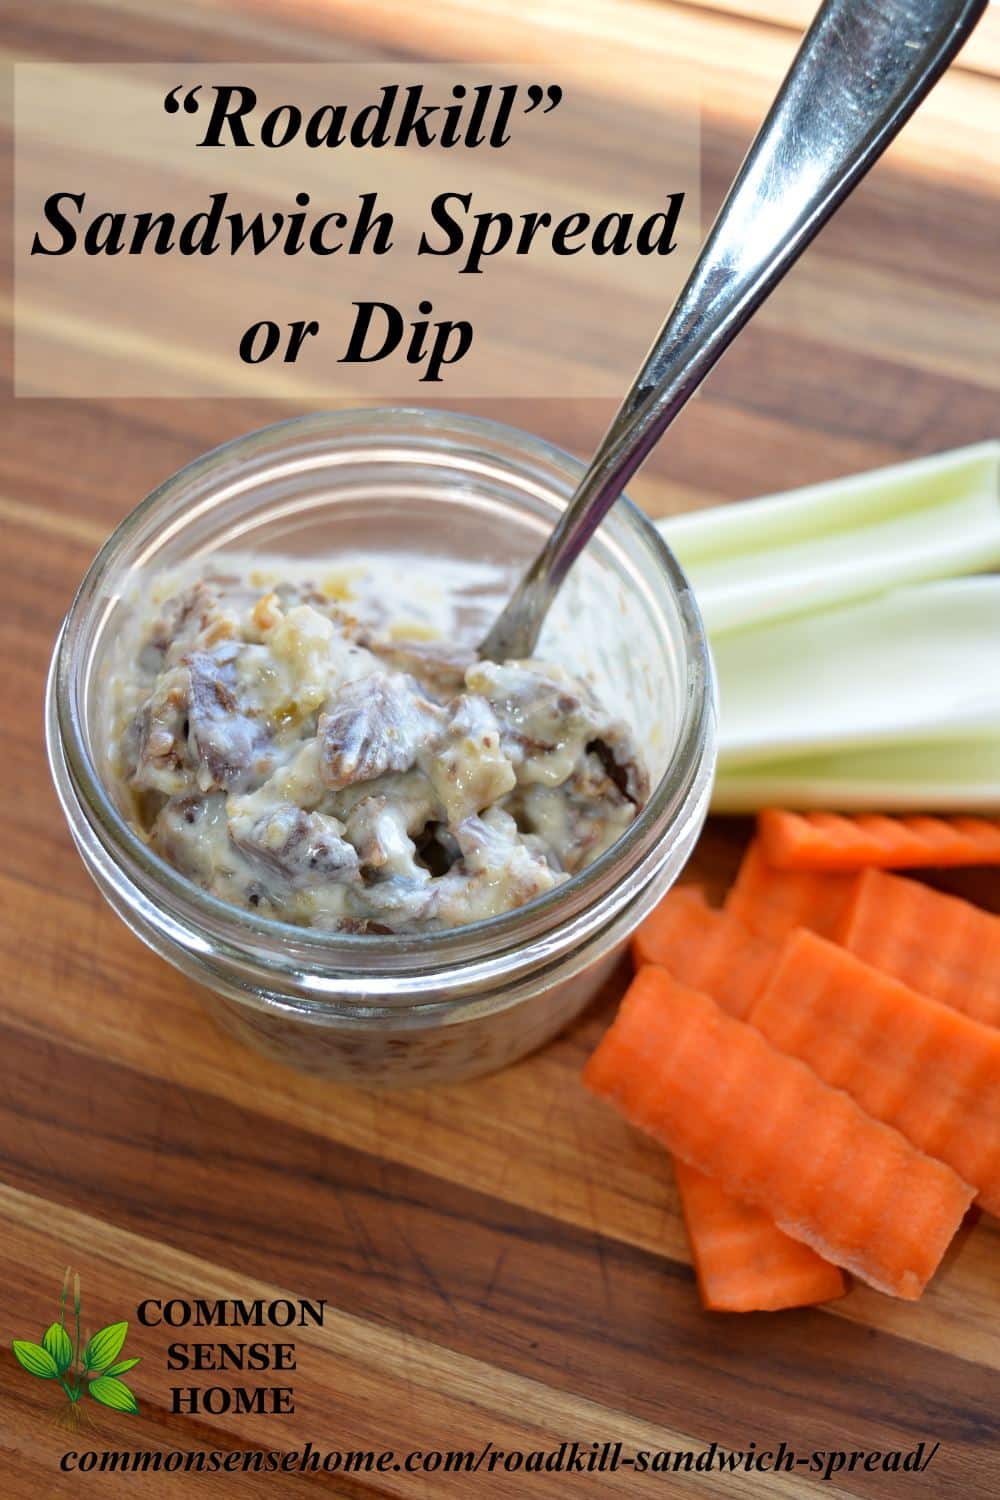 "Roadkill" Sandwich Spread - quick and easy, budget friendly sandwich spread or dip that's a great way to stretch leftover bits of meat into another meal.